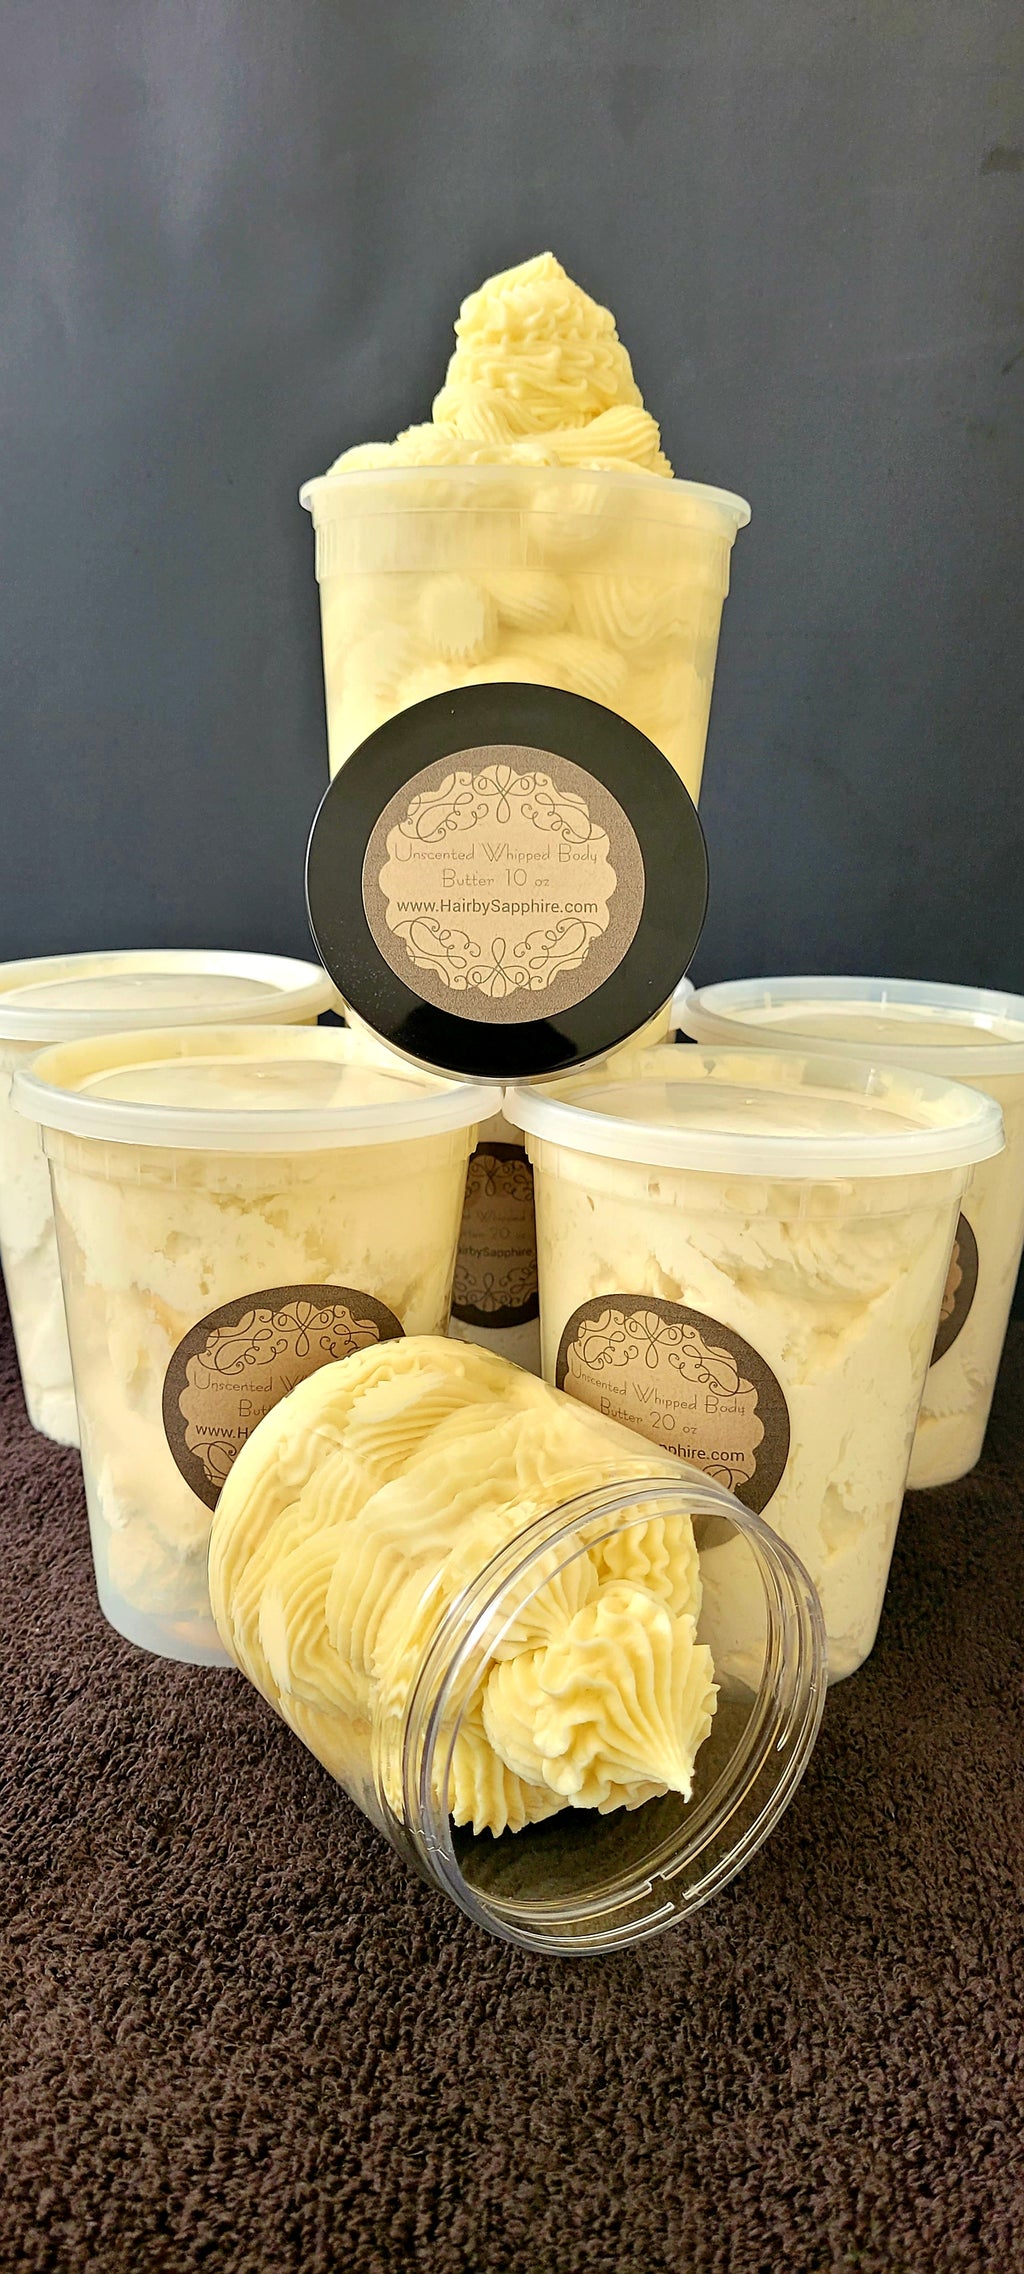 large tub of 1 pound the best real authentic unrefined African ivory white whipped shea body butter from Hair by Sapphire